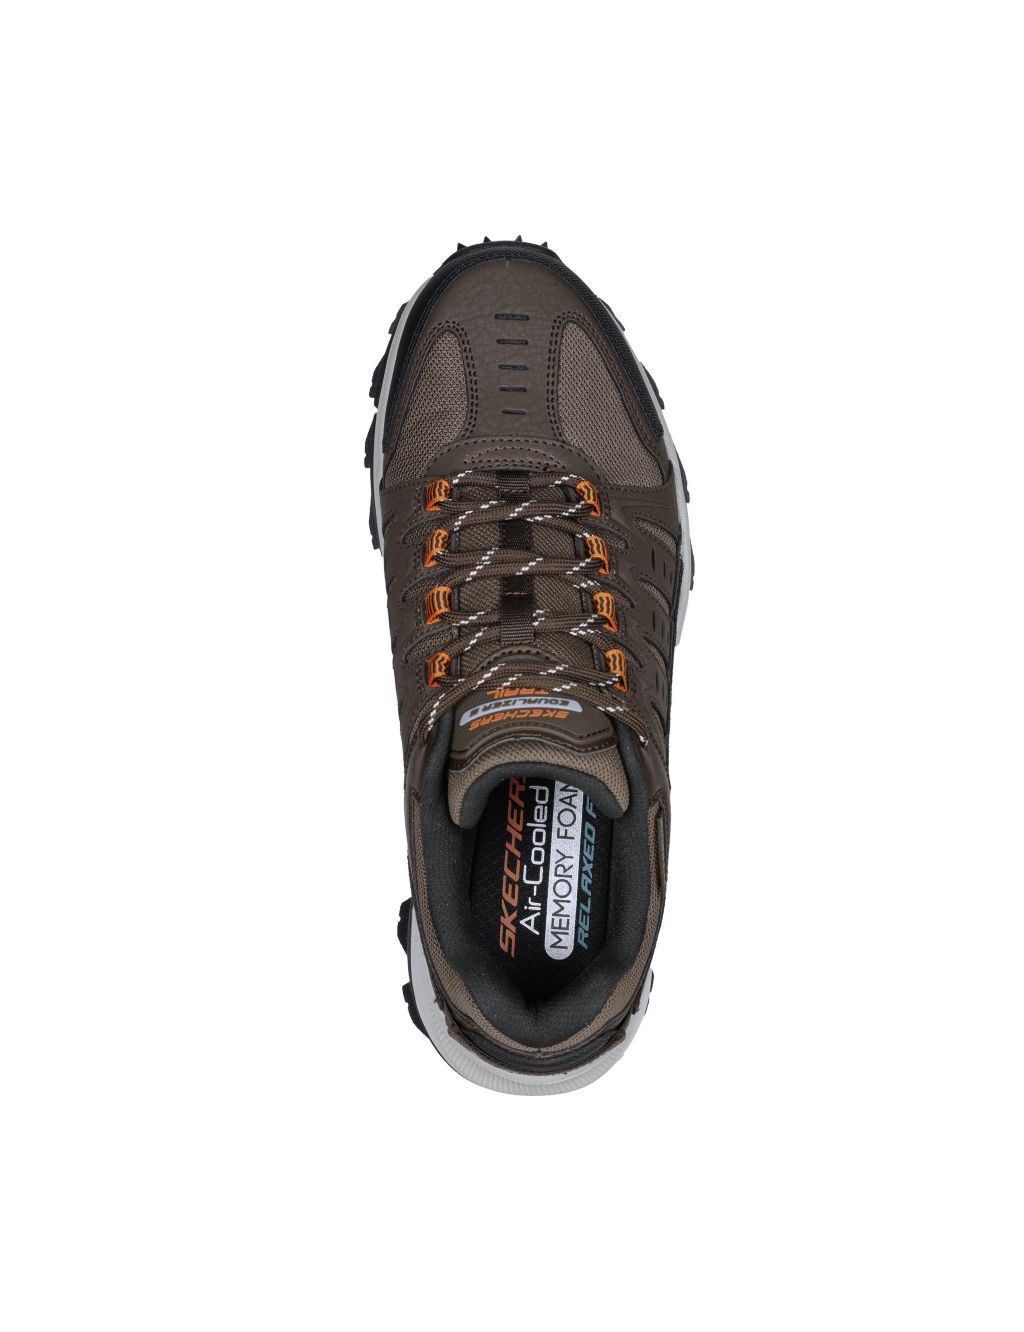 Equalizer 5.0 Trail Solix Lace Up Trainers image 3